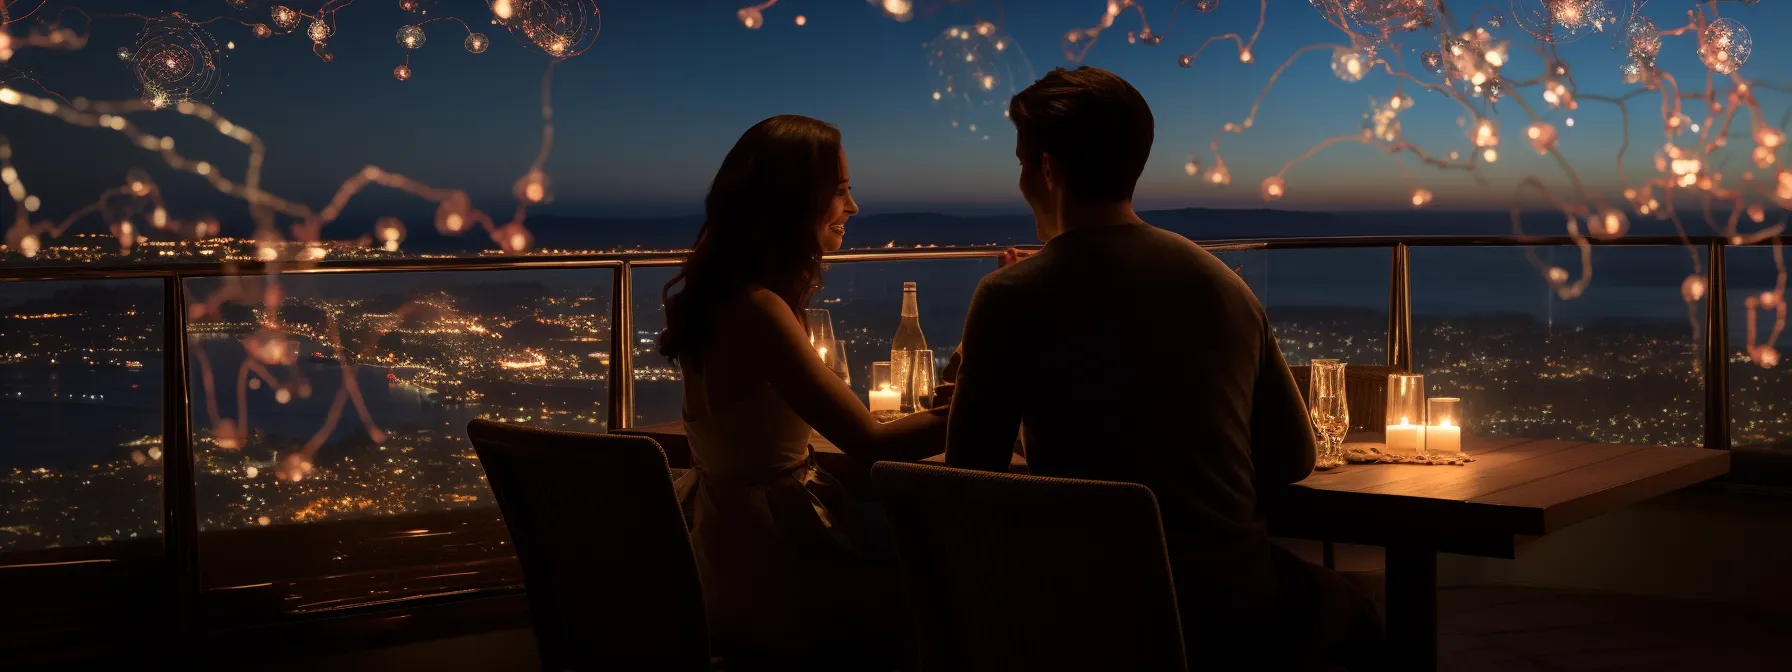 A couple sitting at a table overlooking a city at night while enjoying the breathtaking views offered by Secrets Resorts.